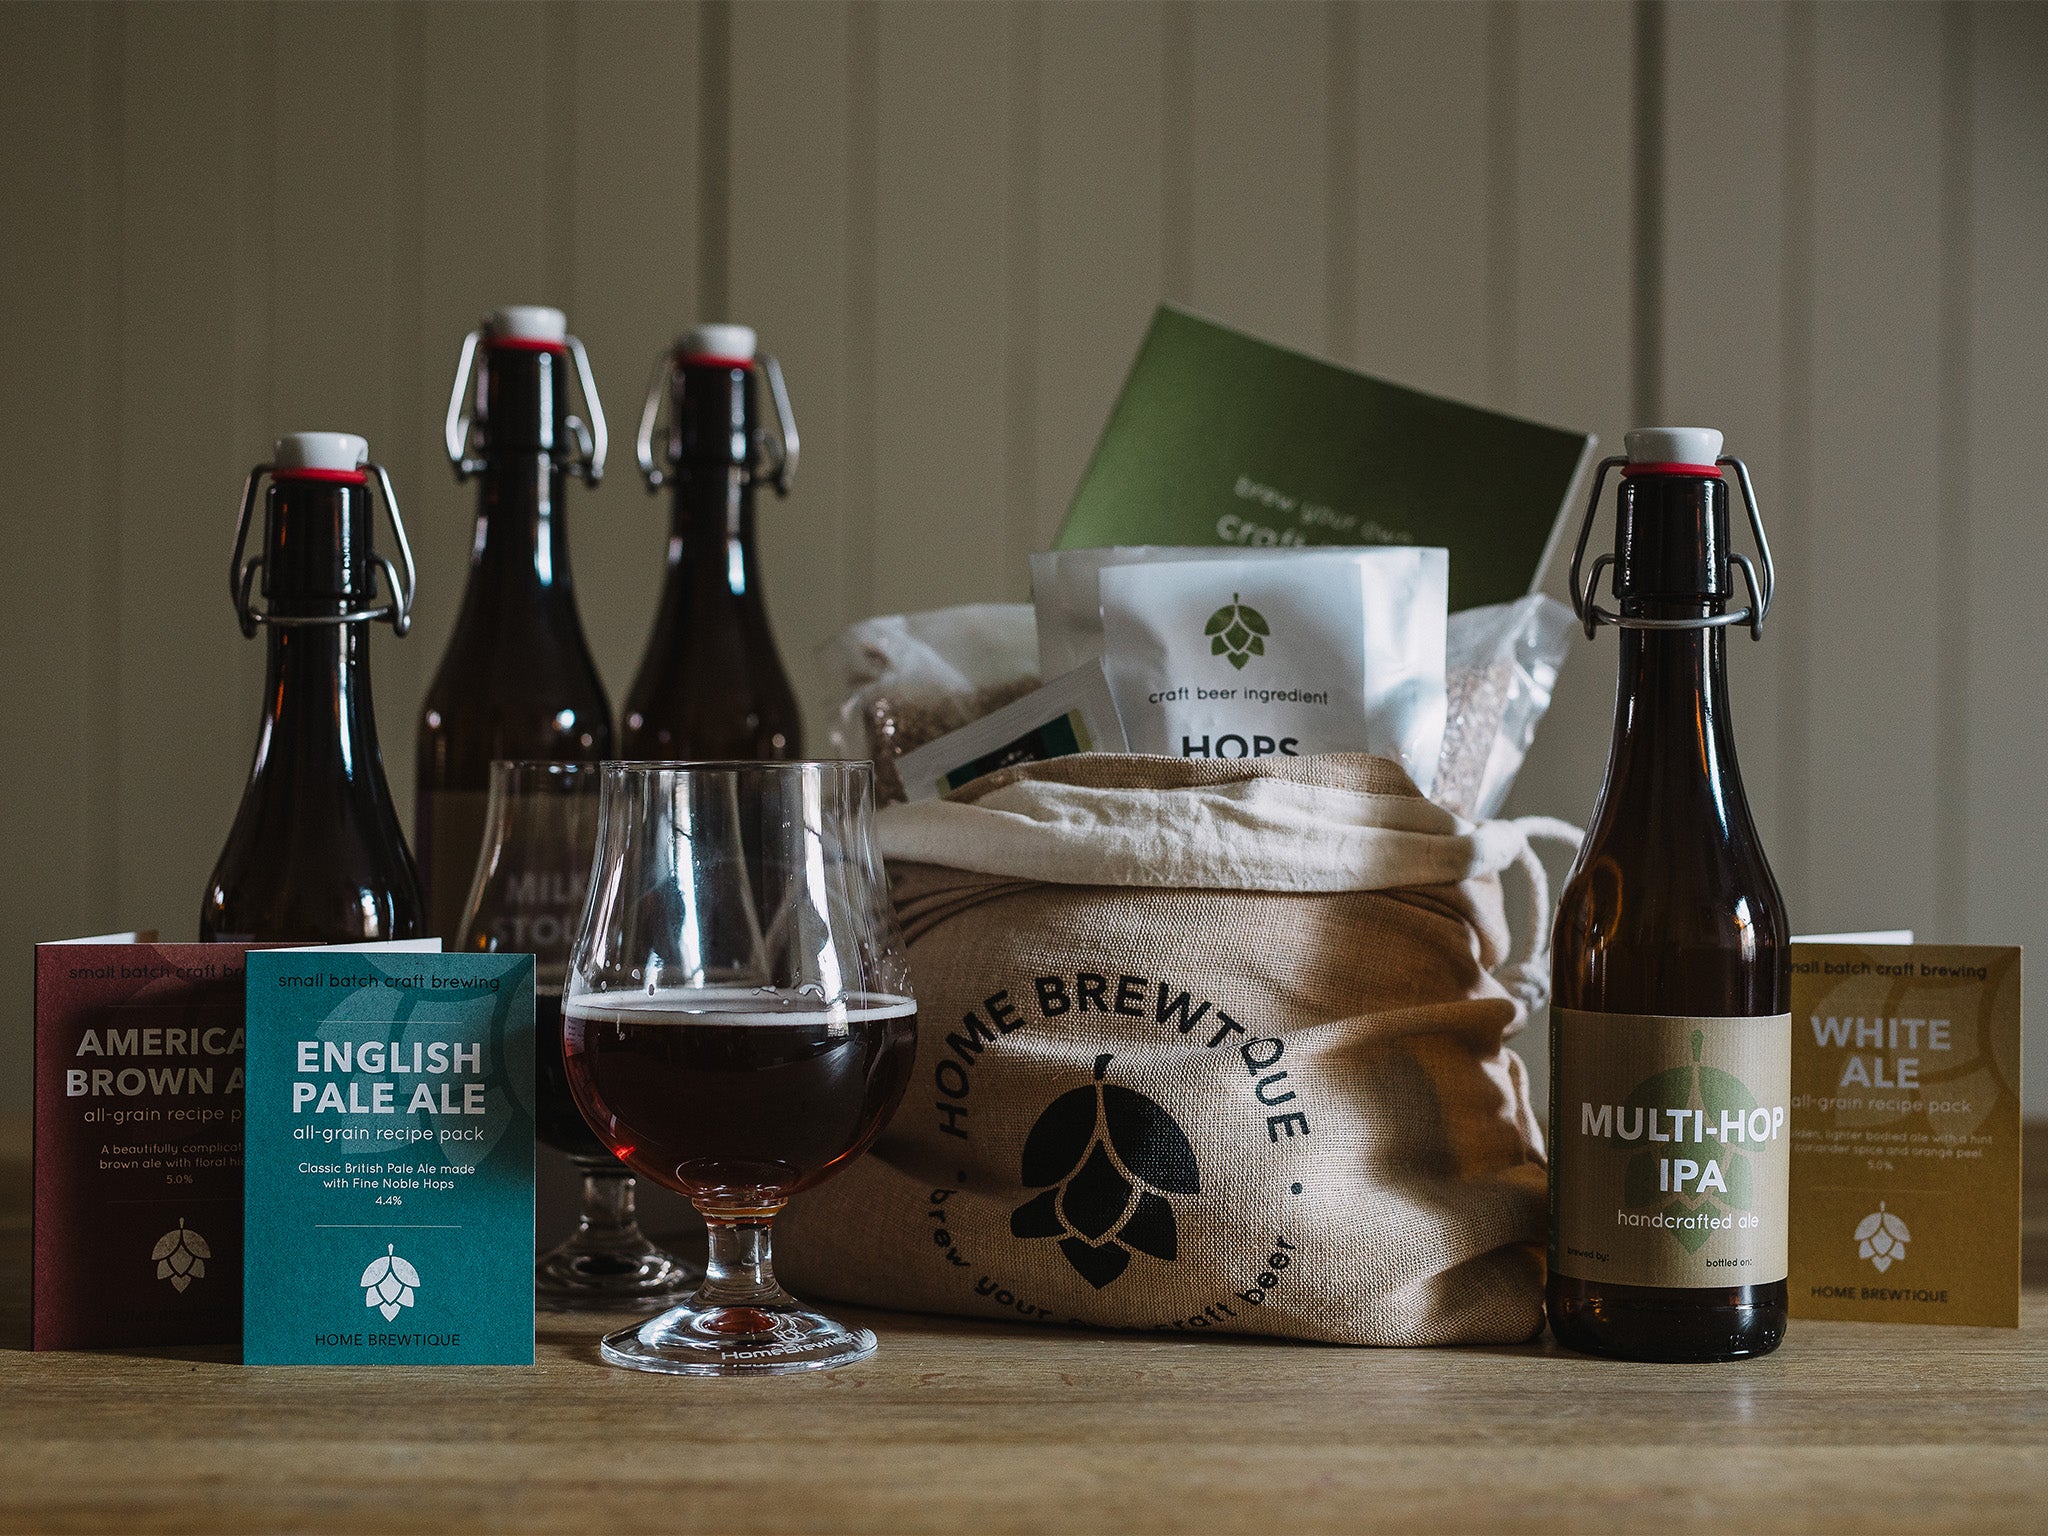 Homebrewtique offers tiny-batch kits that allow you to experiment with flavours and pairings